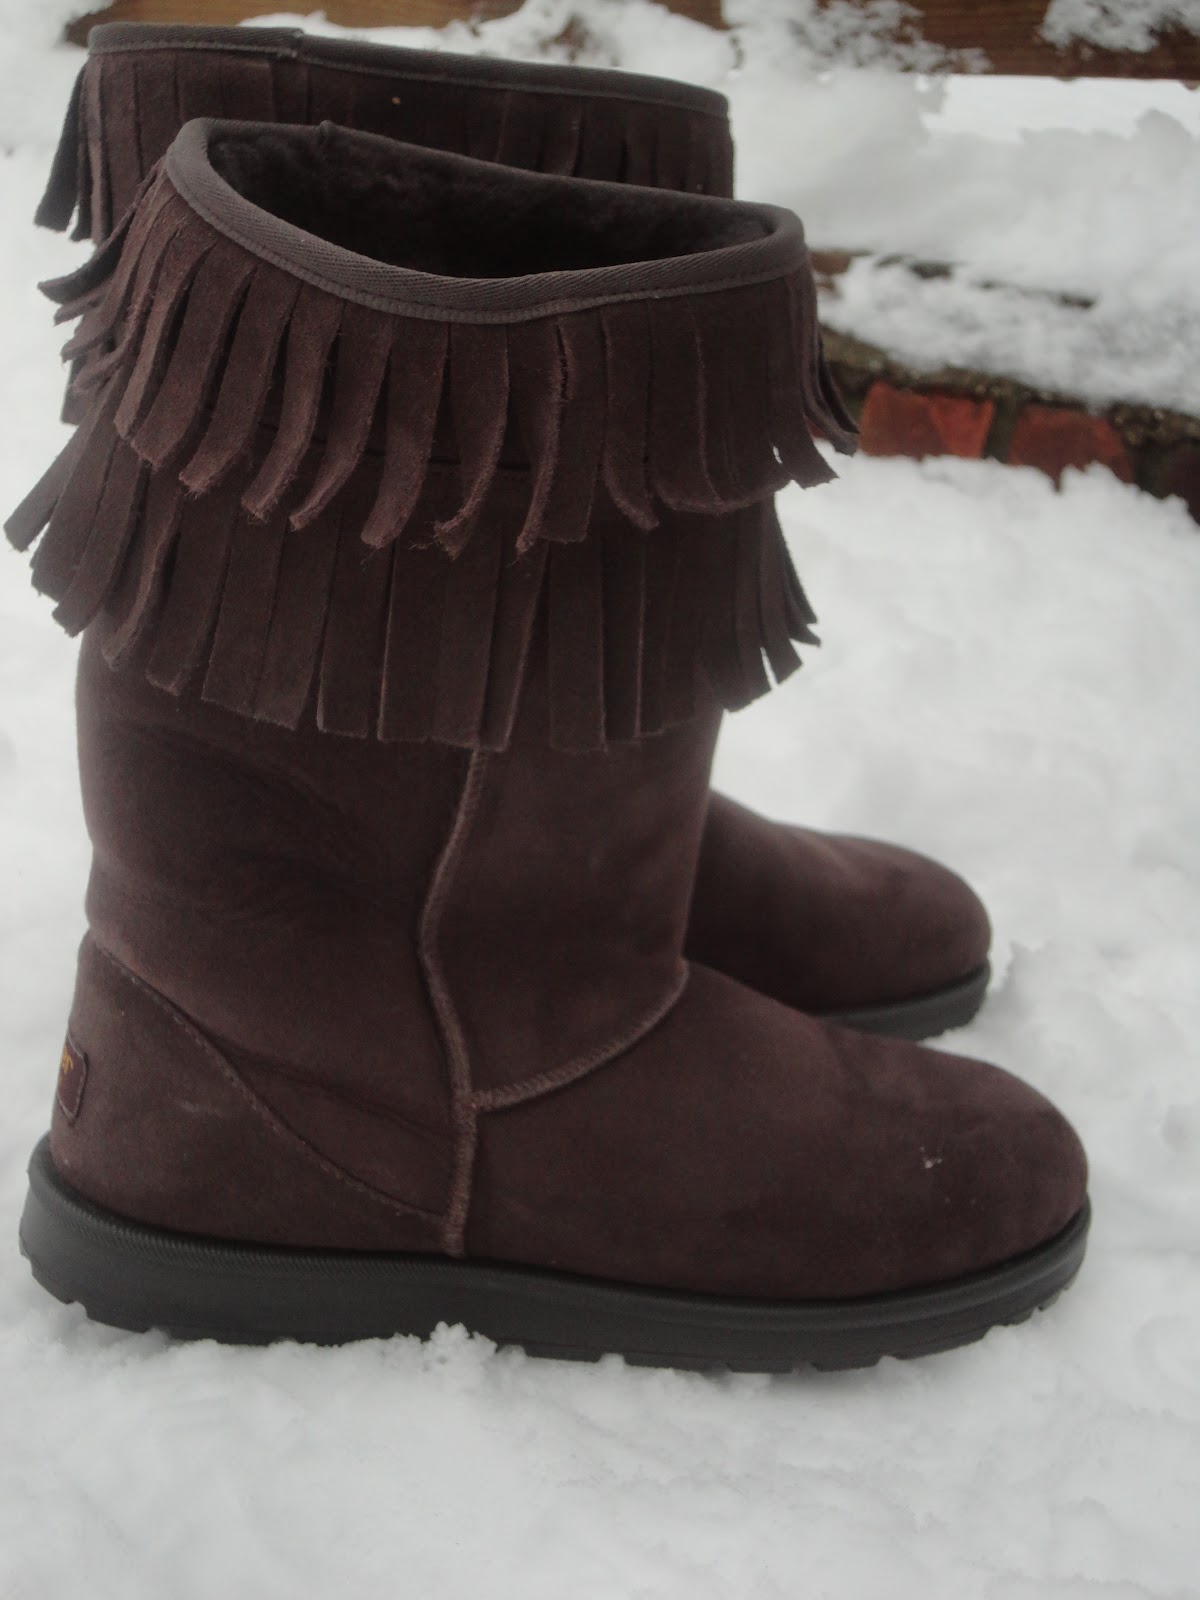 Warm and Comfortable Hotter Boots